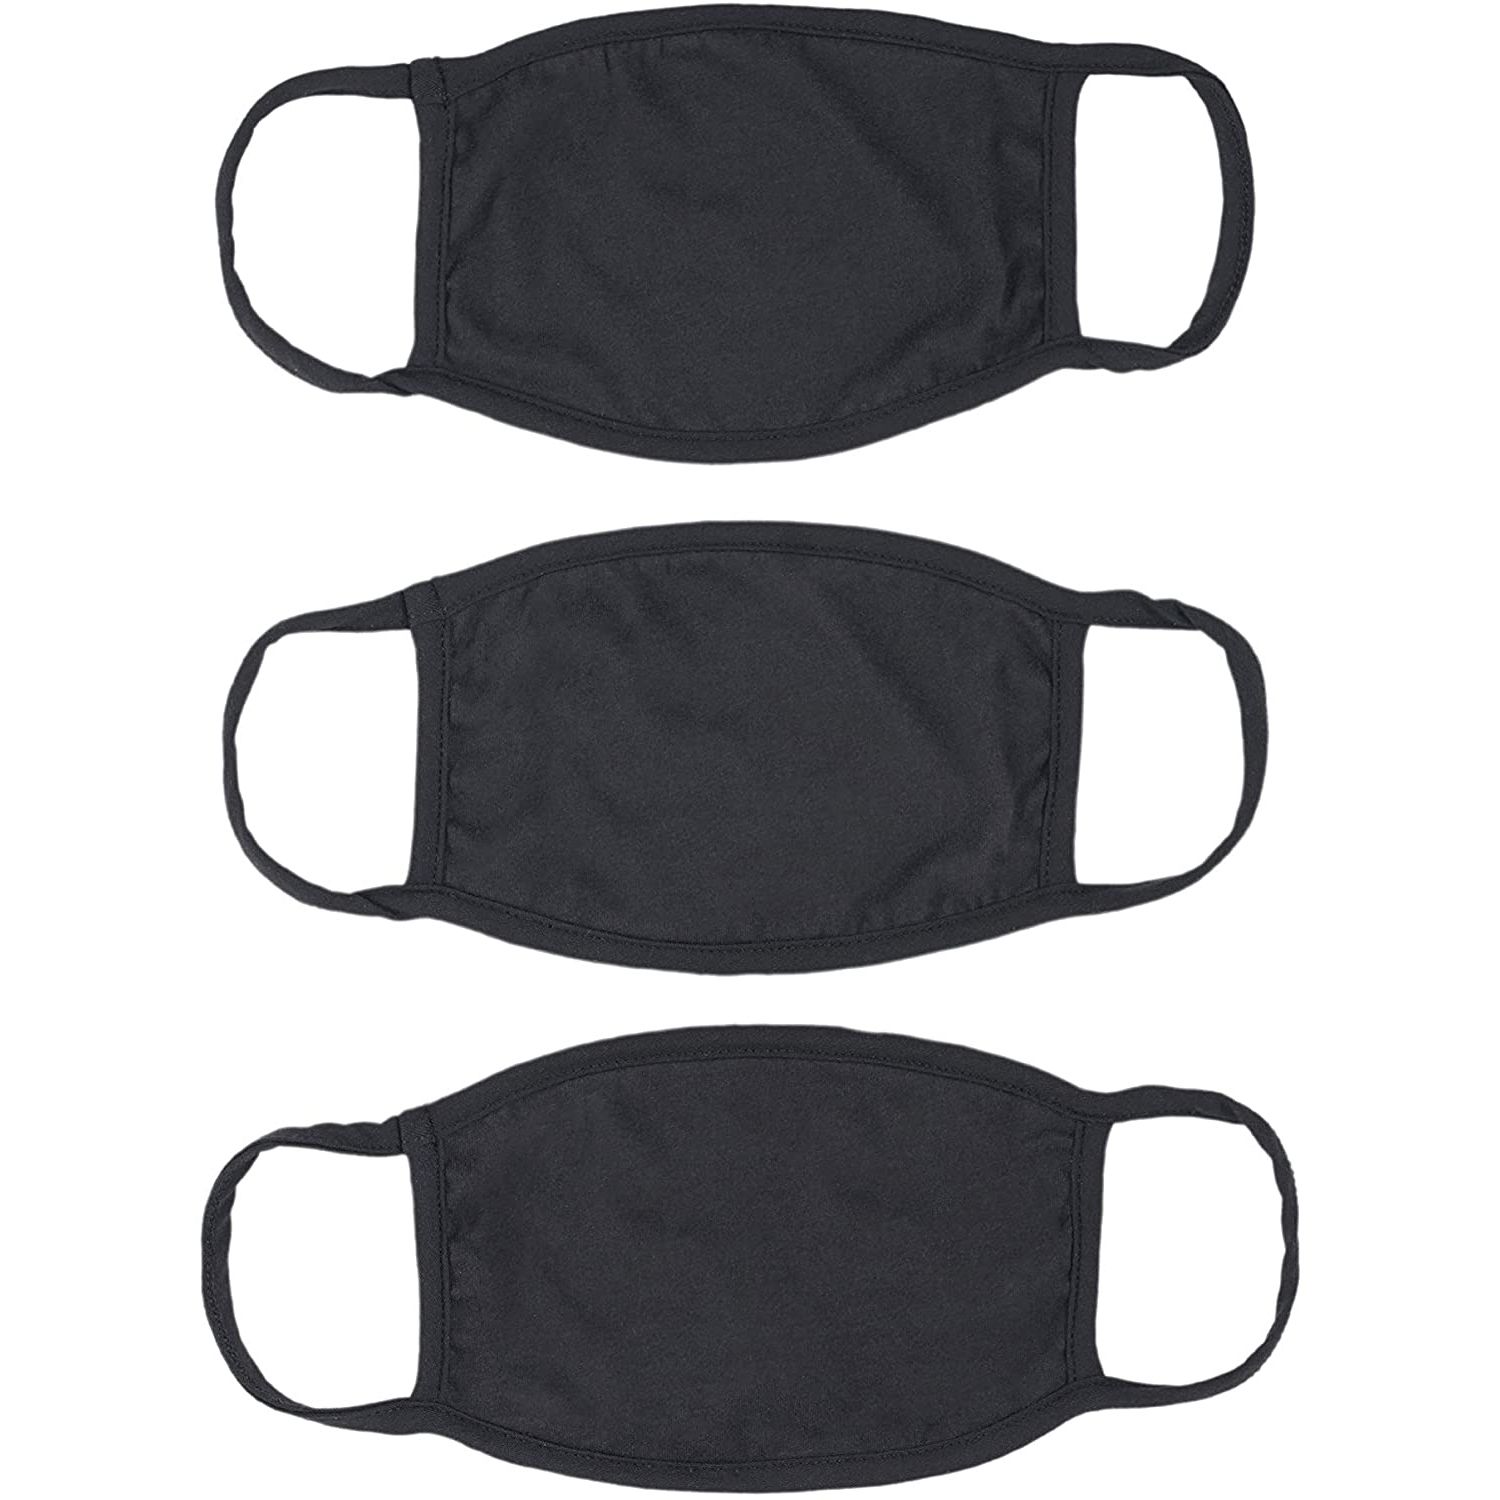 Reusable Face Cover (Pack of 3)